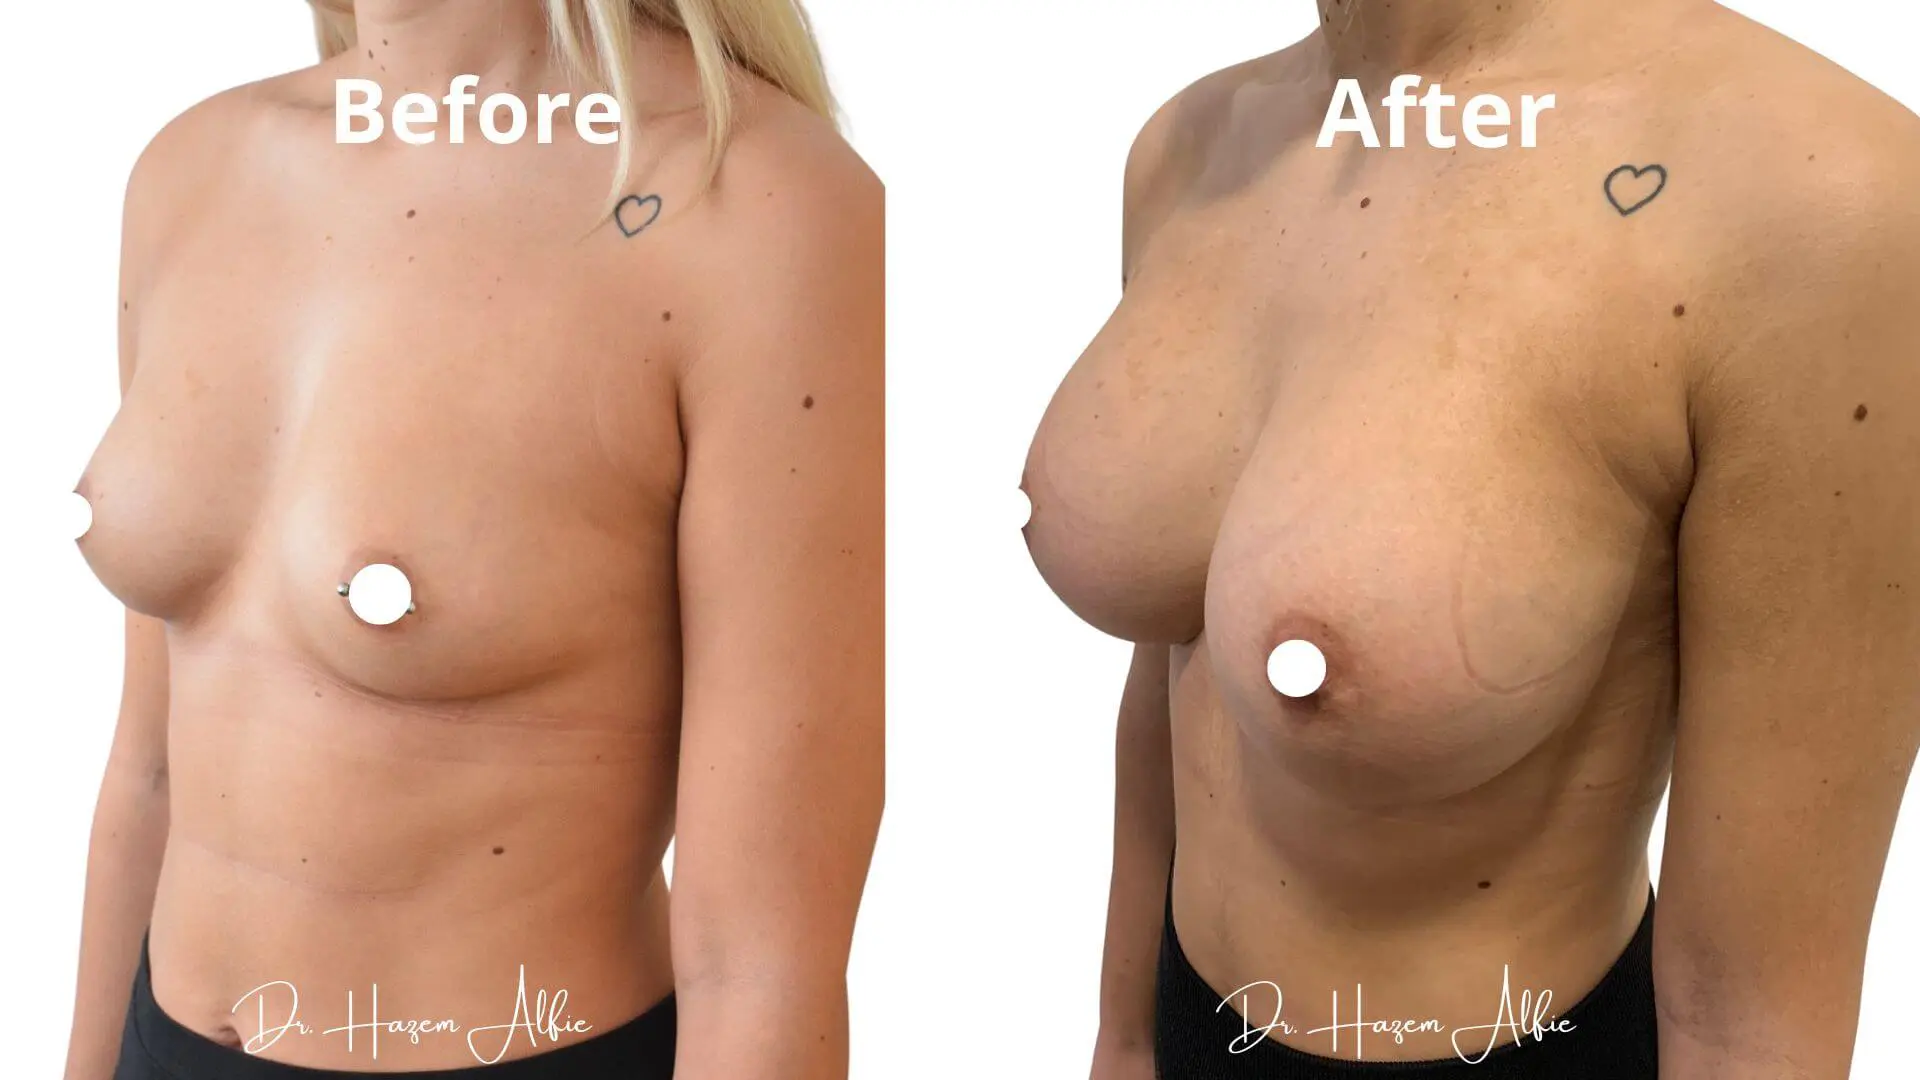 A woman before and after breast augmentation surgery.